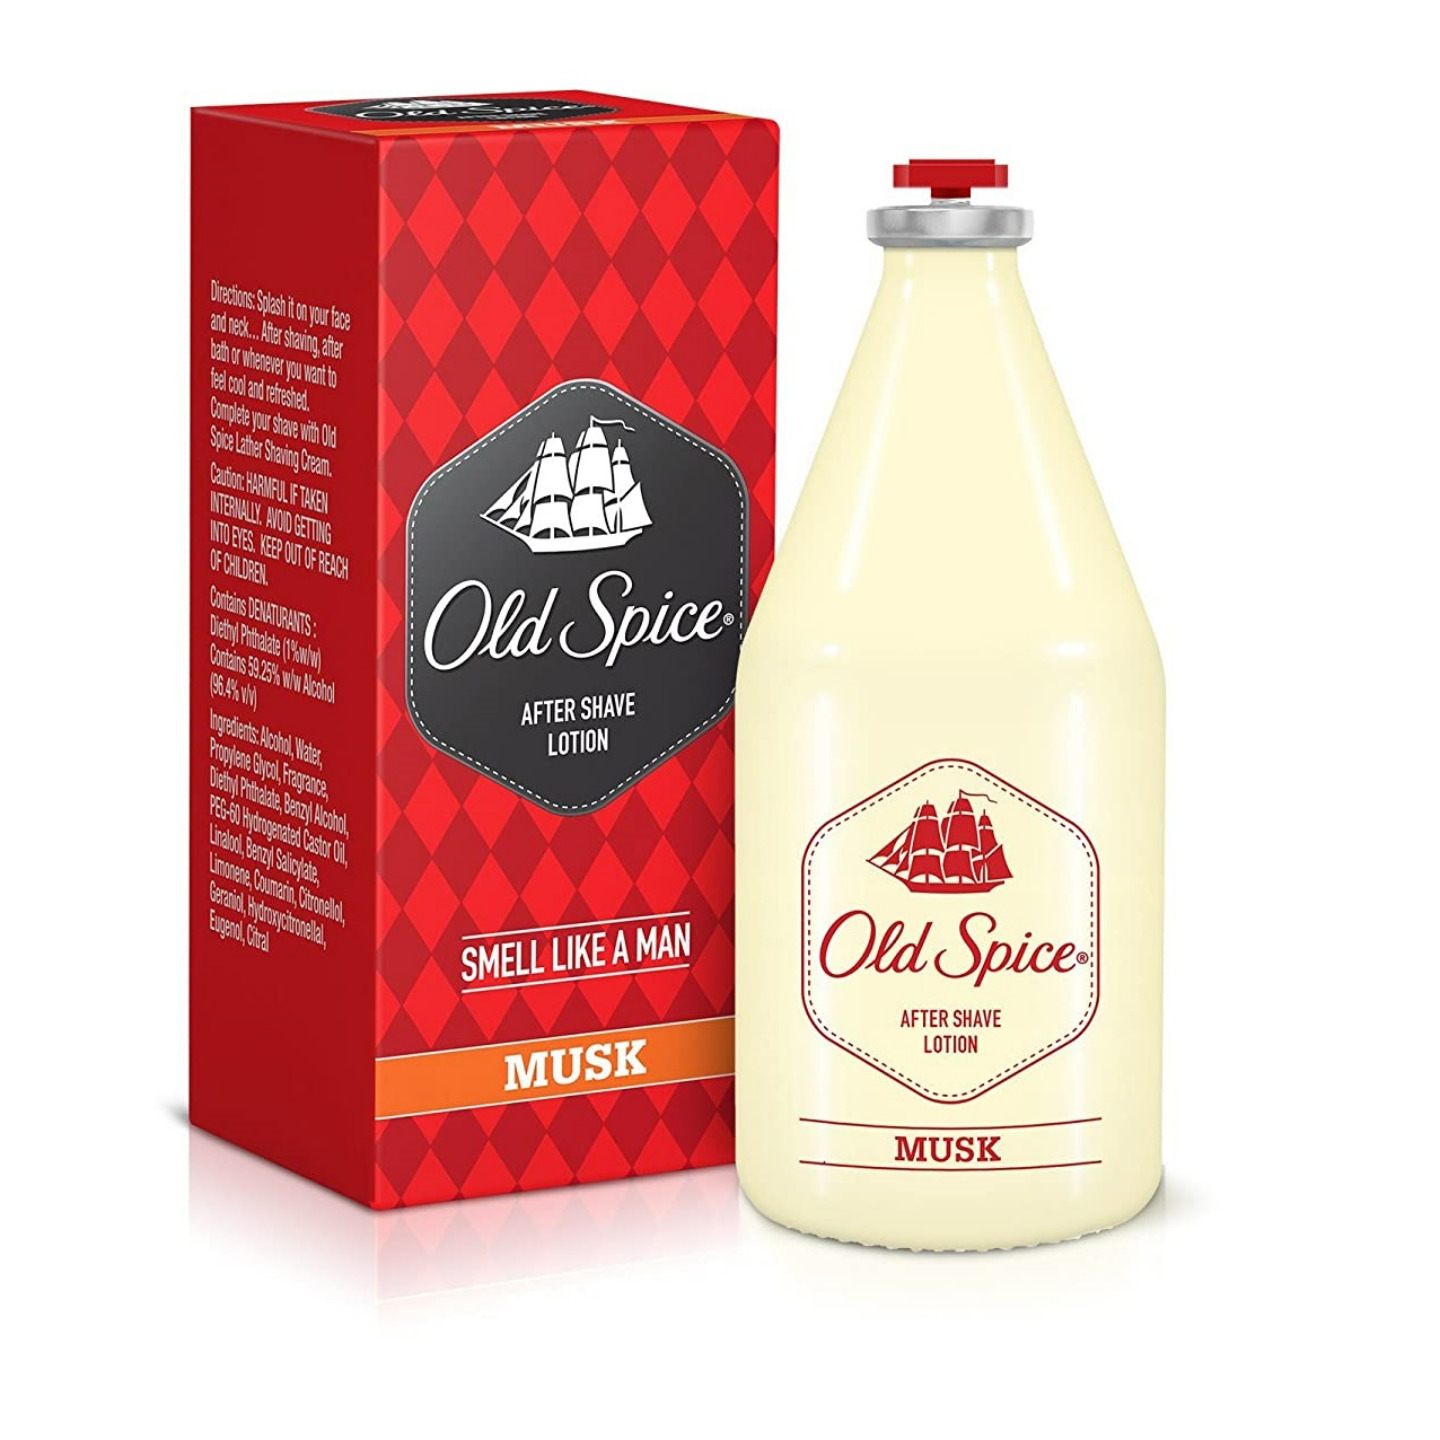 Old Spice After Shave Lotion - 150 ml Musk